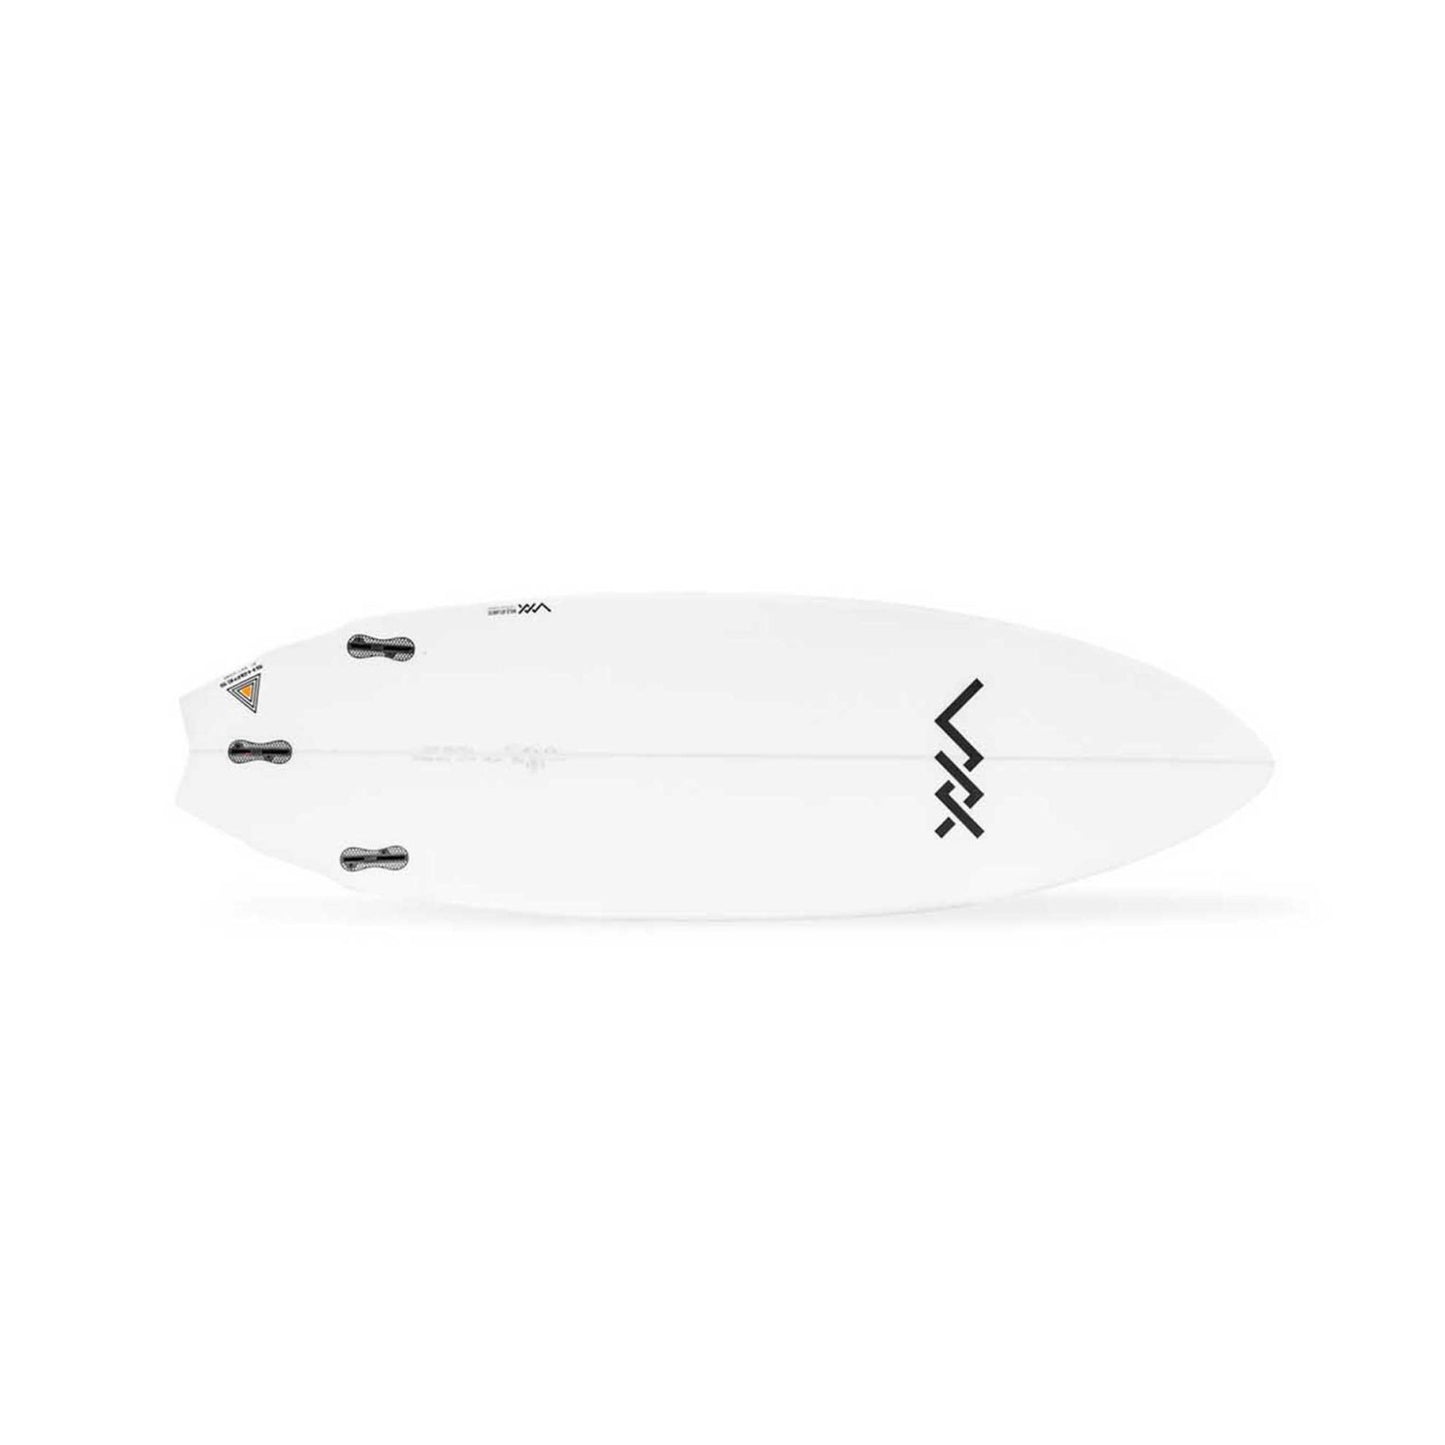 Double Wing High Performance Fish Surfboard